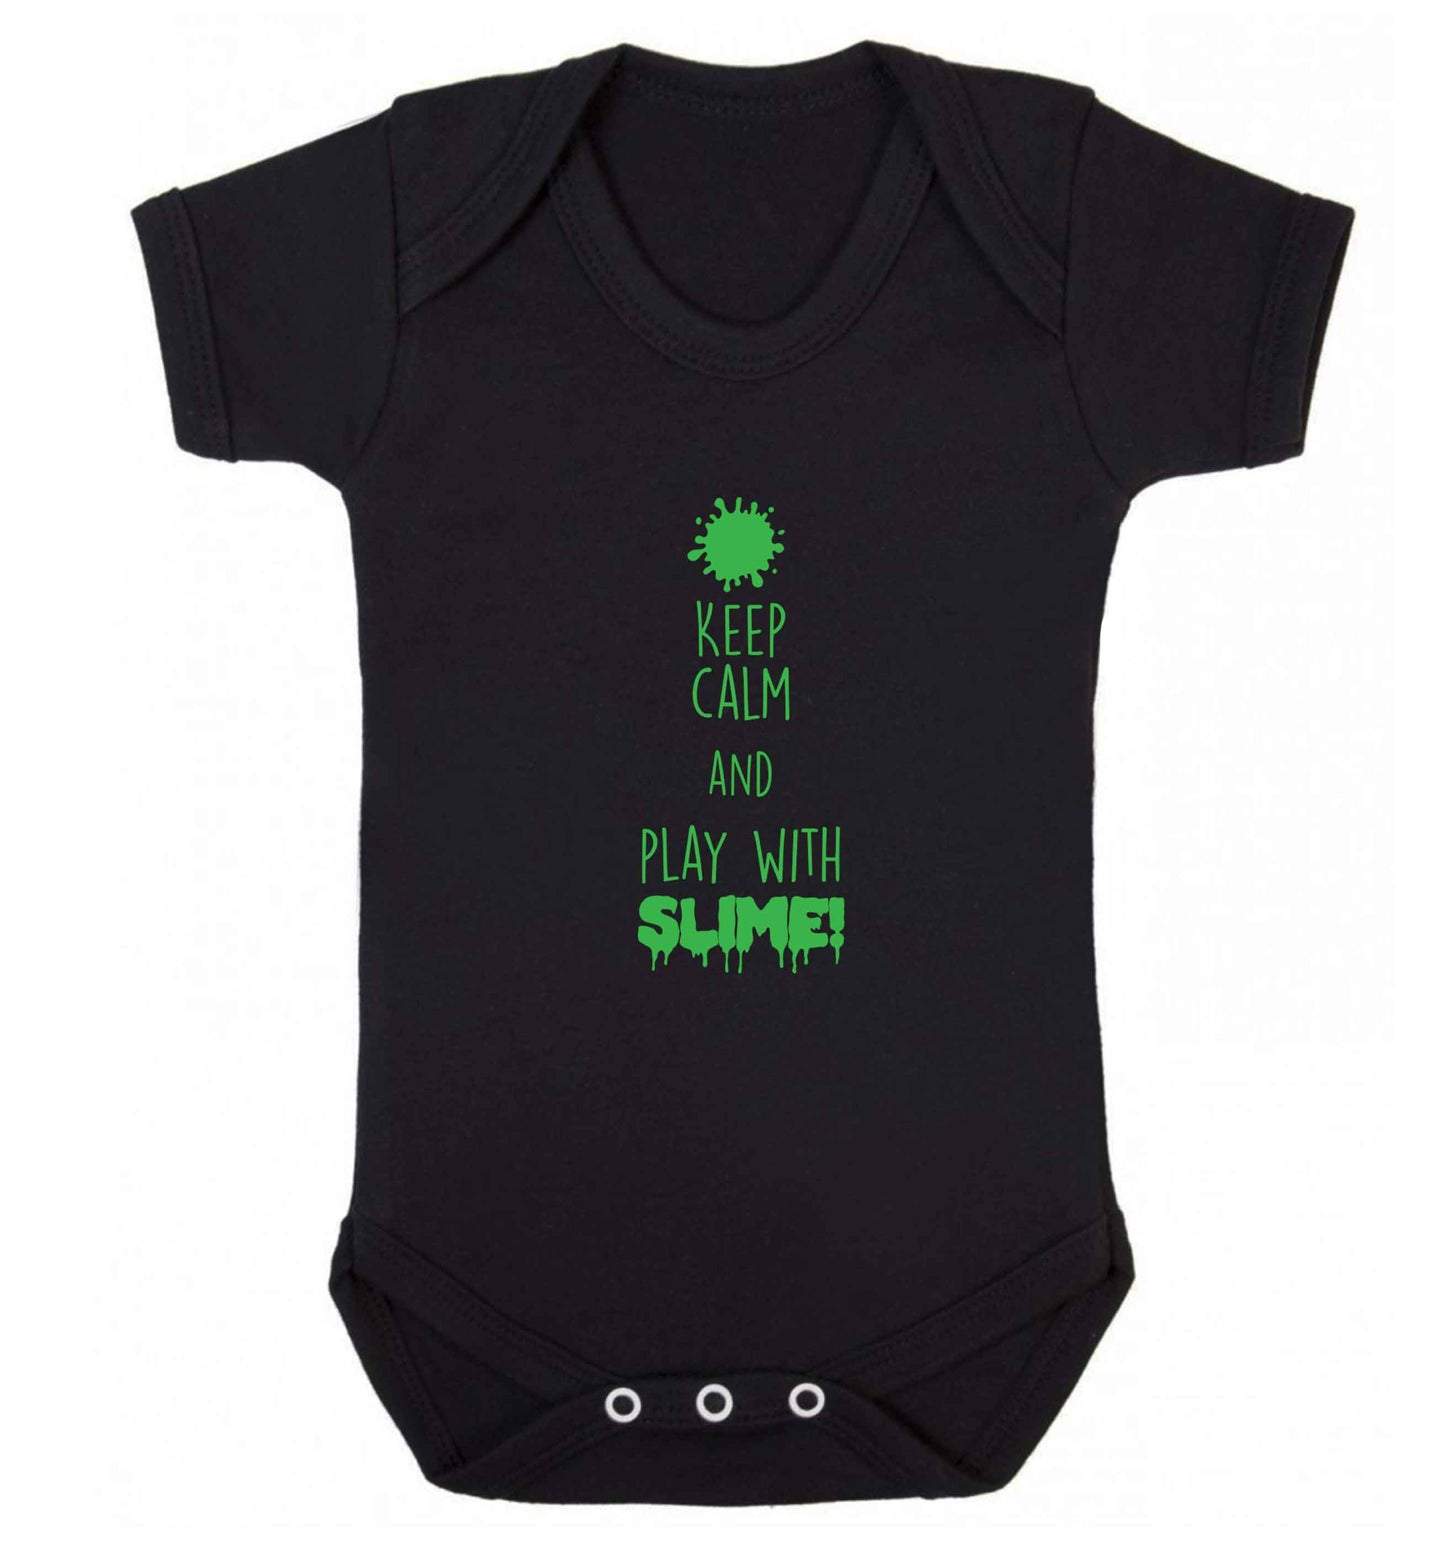 Neon green keep calm and play with slime!baby vest black 18-24 months